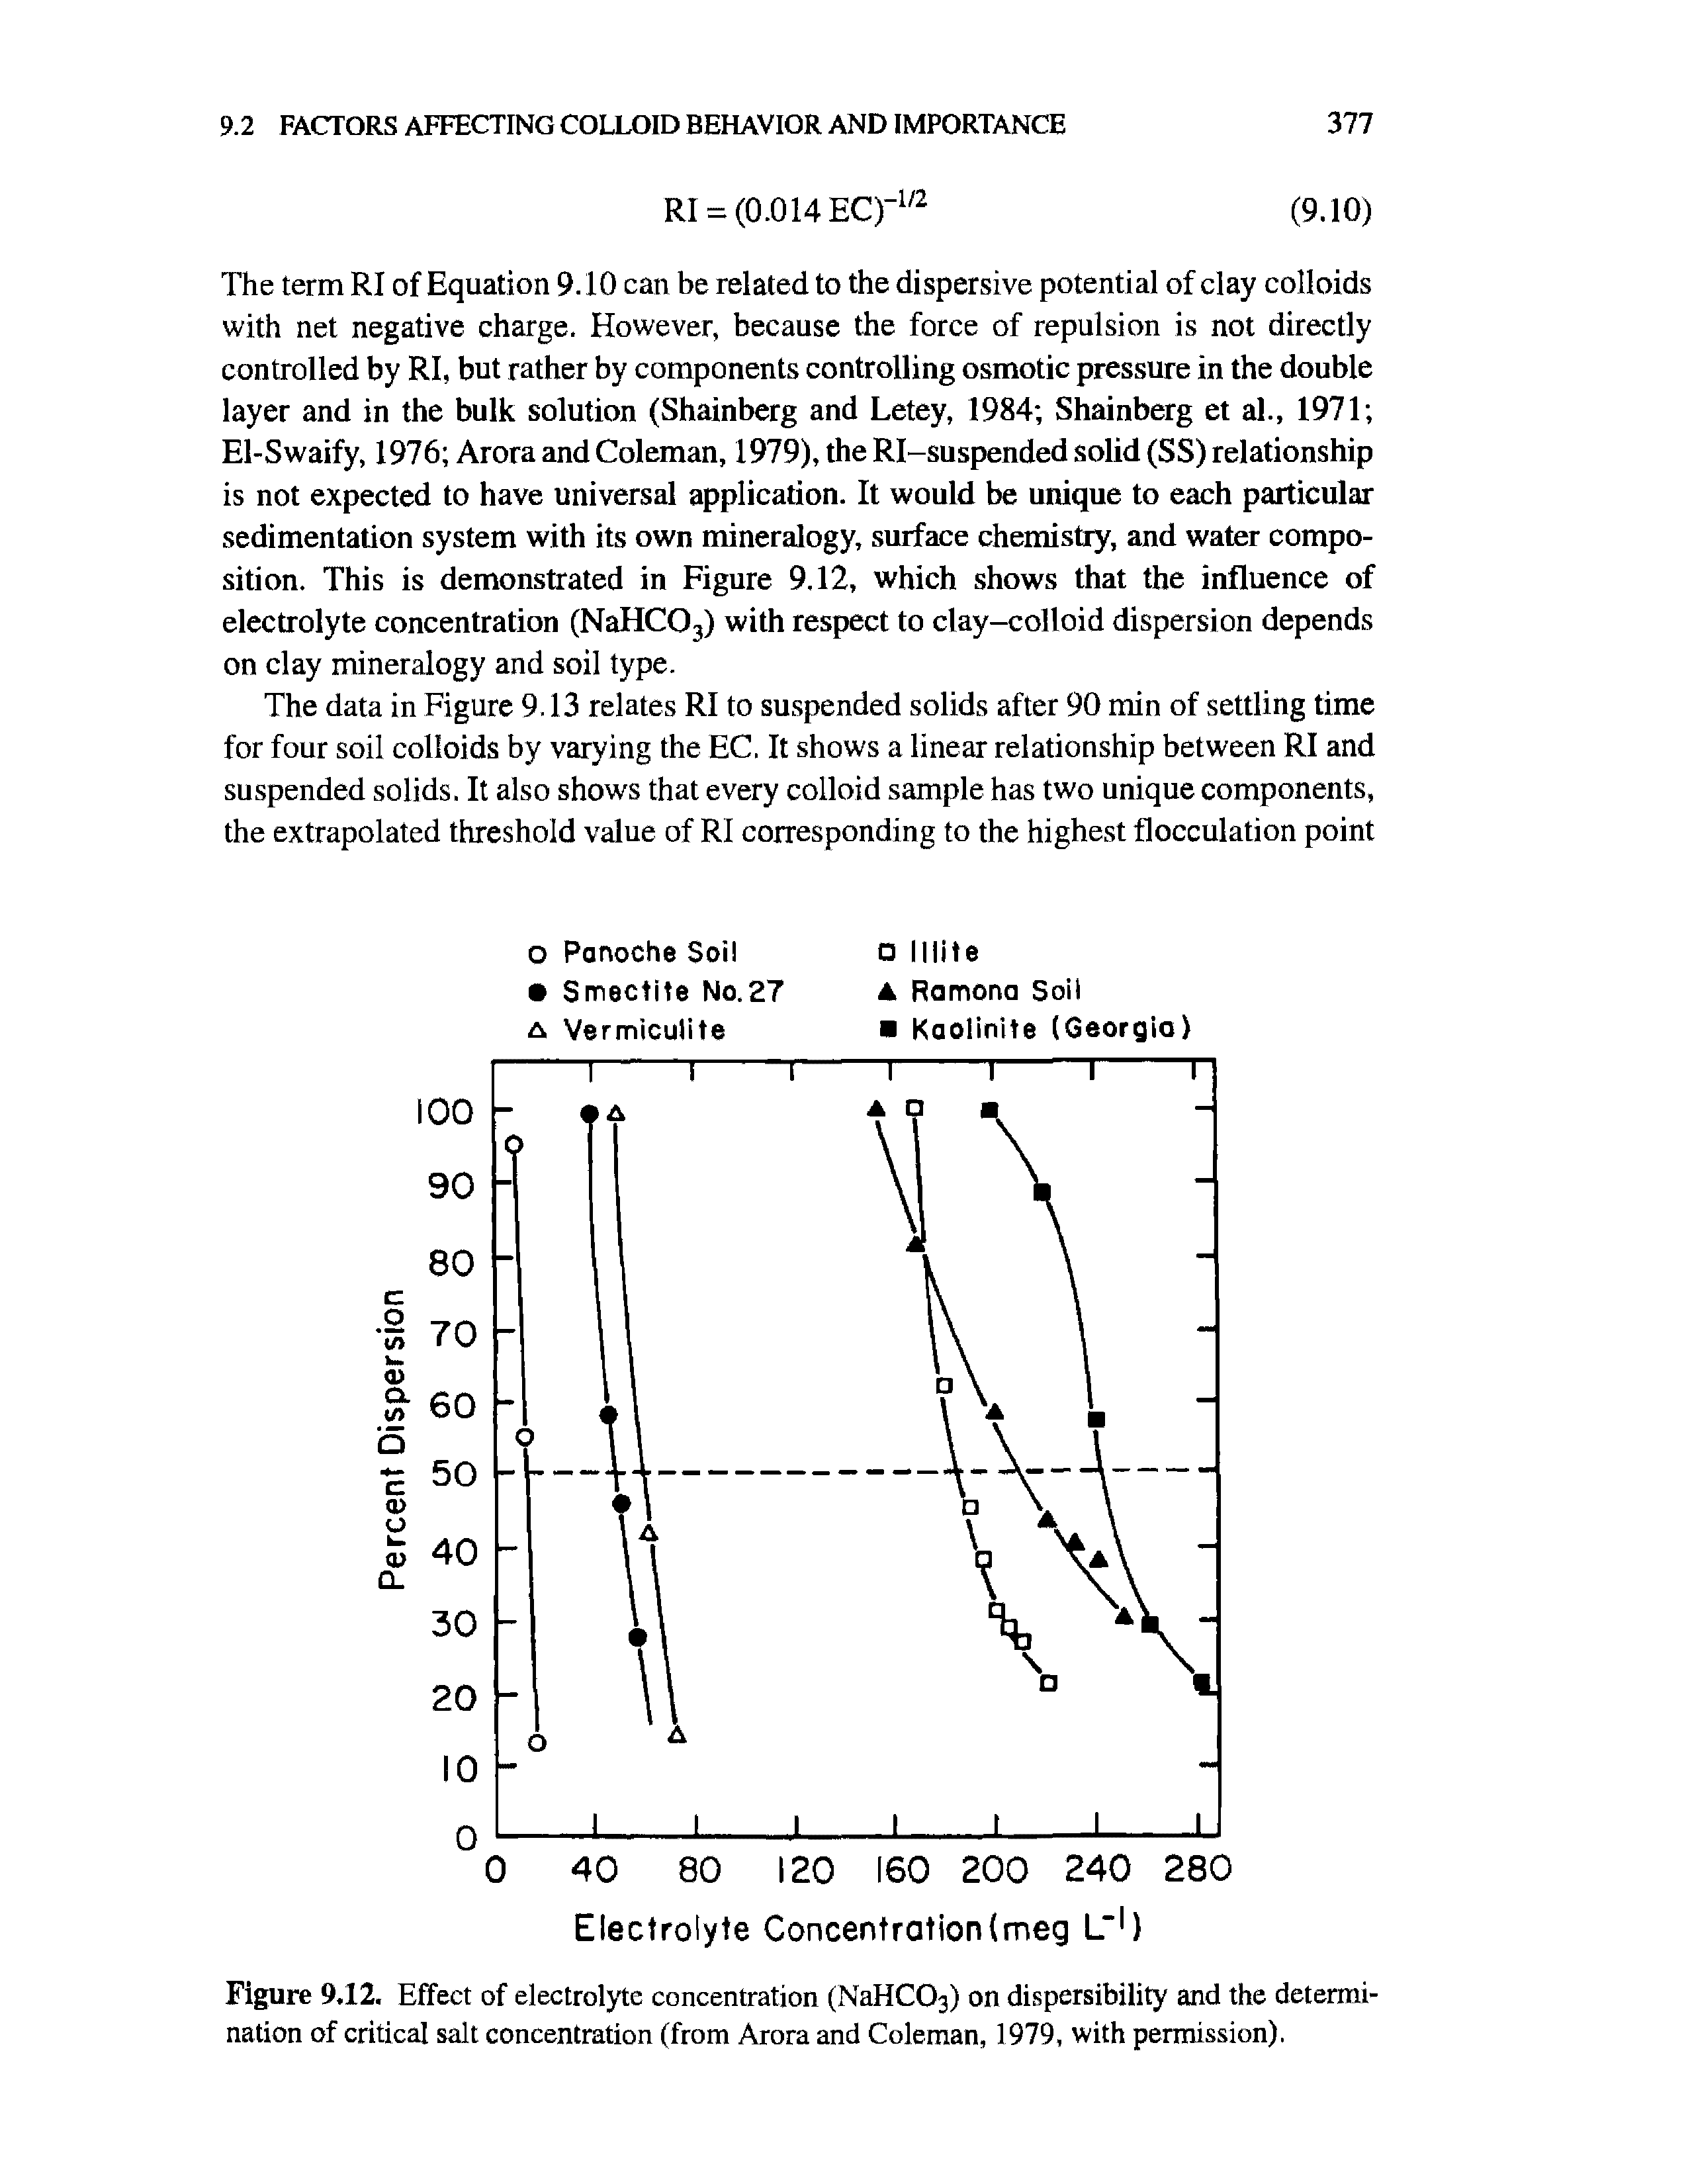 Figure 9.12. Effect of electrolyte concentration (NaHCOs) on dispersibility and the determination of critical salt concentration (from Arora and Coleman, 1979, with permission).